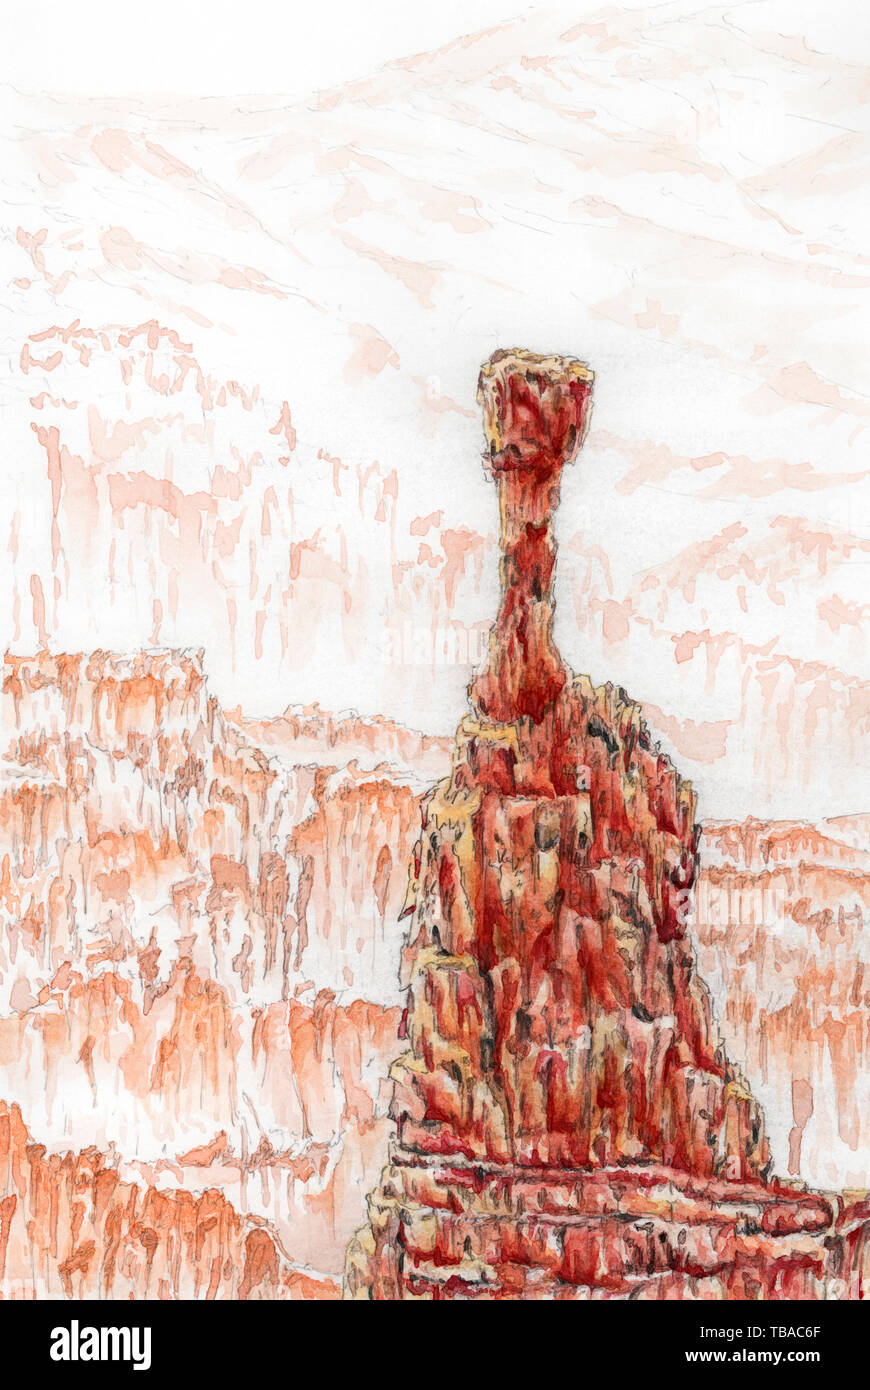 Bryce Canyon National Park, Utah, USA. Thor's Hammer. Watercolor on paper. Stock Photo